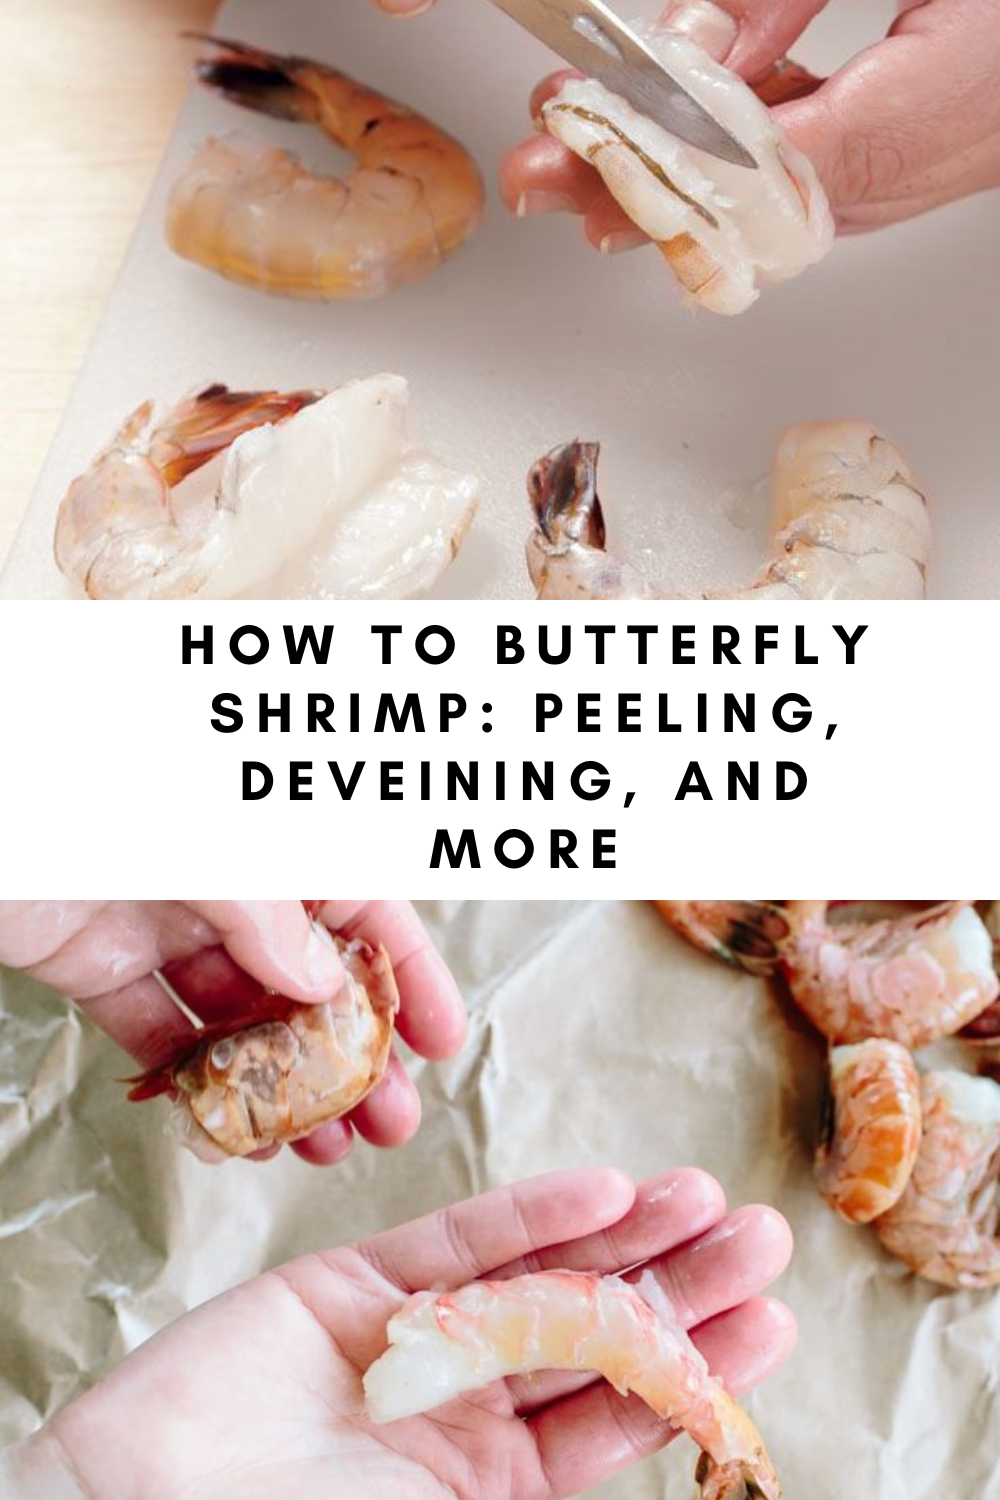 How to Butterfly, Peel and Devein Shrimp